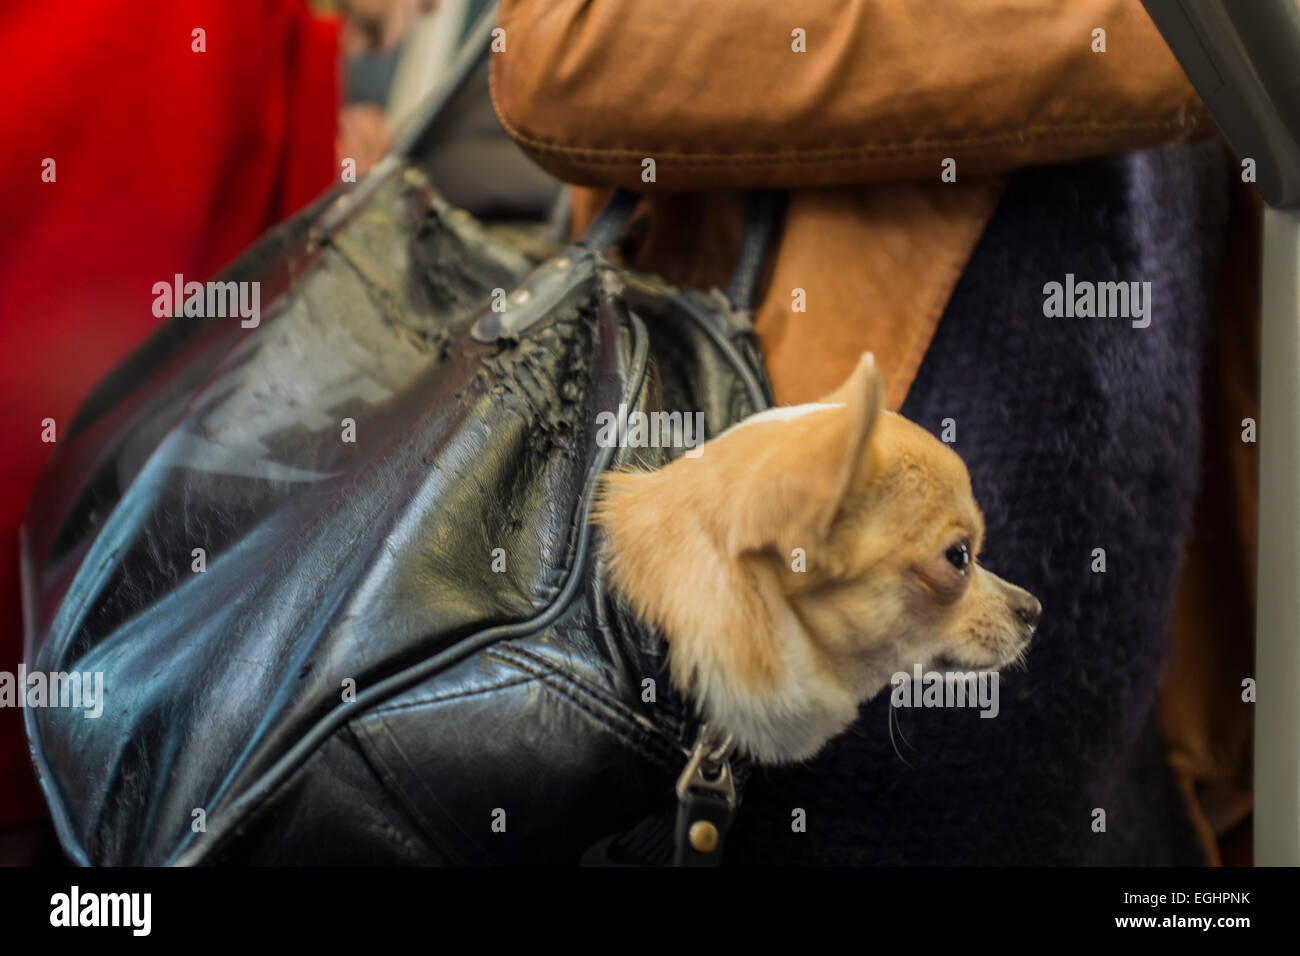 Small dog in a bag on a crowded tram in Nice, France Stock Photo